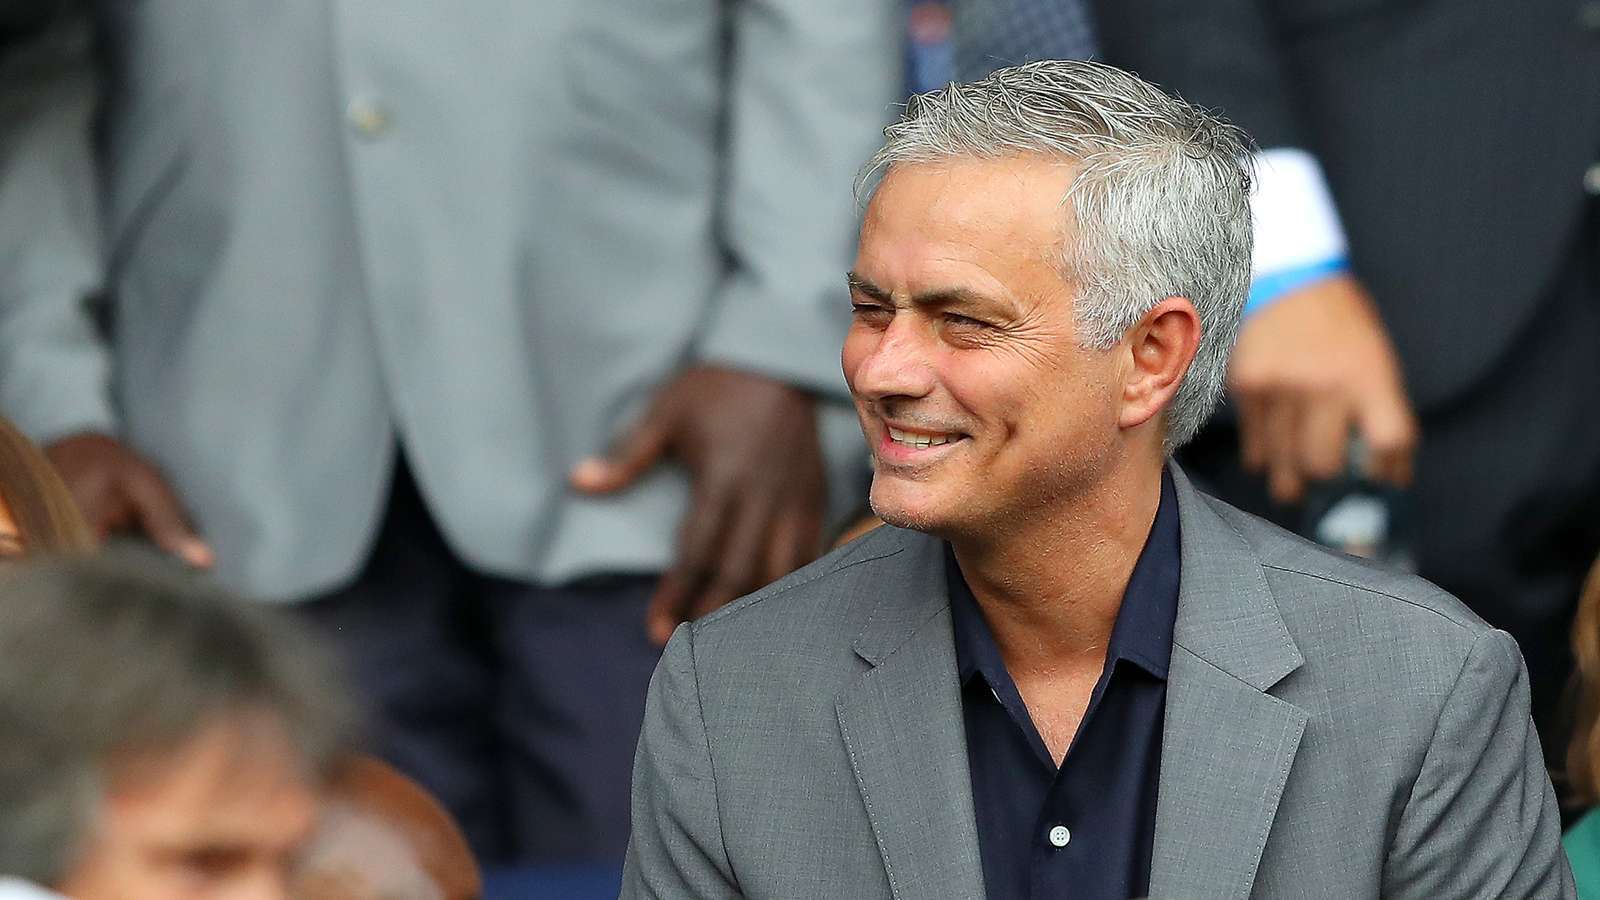 Mourinho Has Mixed Feelings about the Match against Manchester United